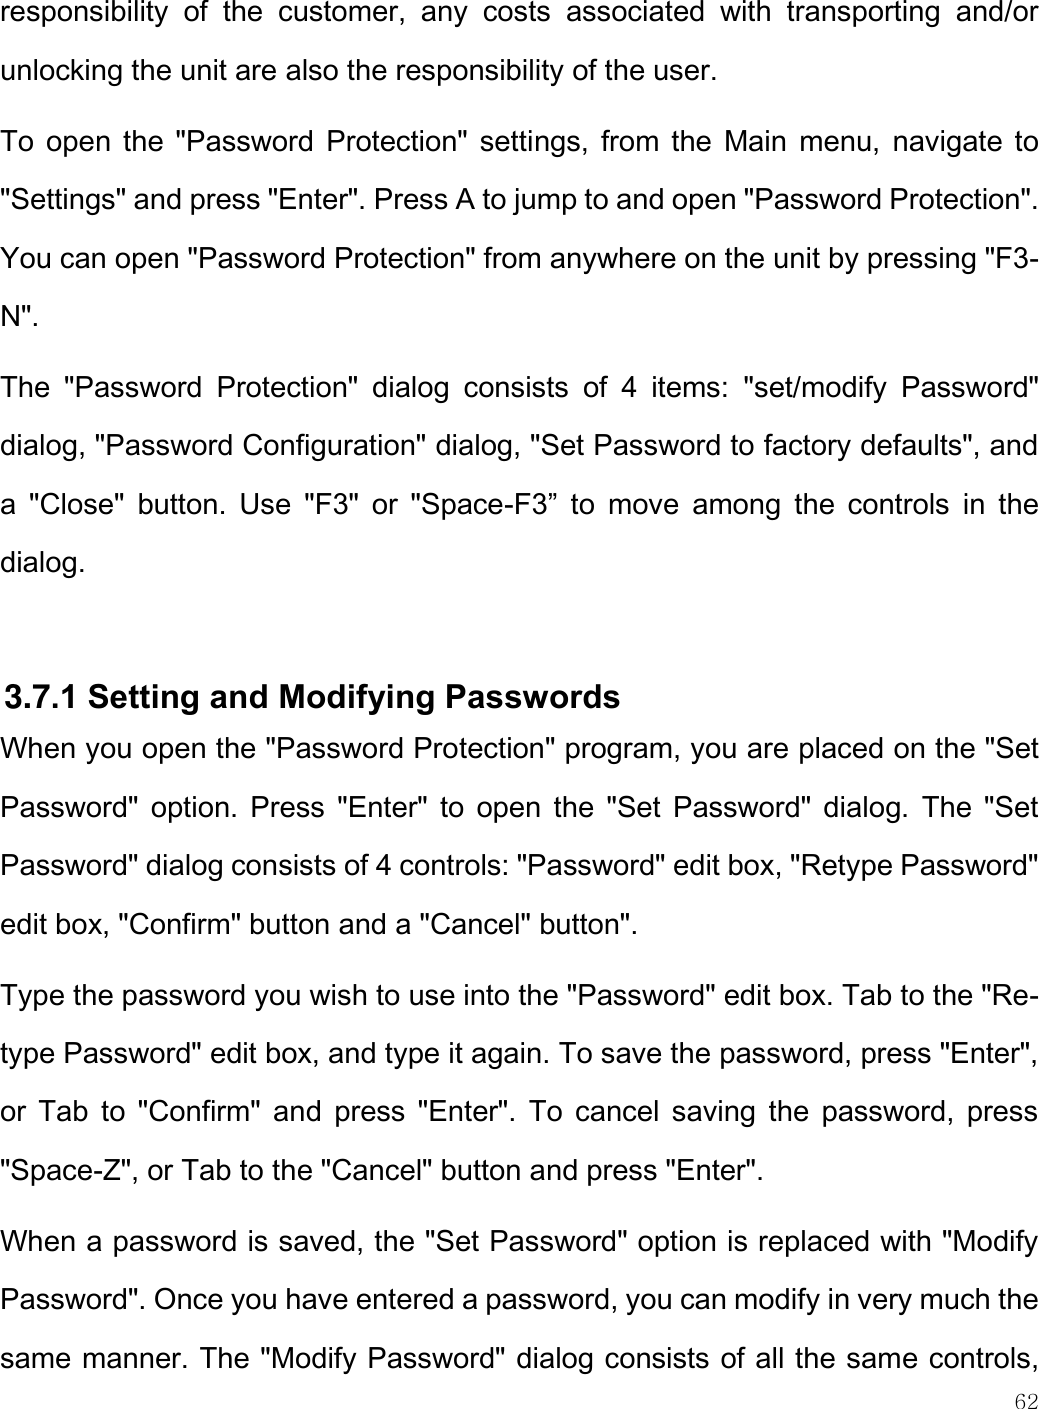    62  responsibility  of  the  customer,  any  costs  associated  with  transporting  and/or unlocking the unit are also the responsibility of the user.  To open the &quot;Password Protection&quot;  settings, from the Main menu, navigate  to &quot;Settings&quot; and press &quot;Enter&quot;. Press A to jump to and open &quot;Password Protection&quot;. You can open &quot;Password Protection&quot; from anywhere on the unit by pressing &quot;F3-N&quot;.  The  &quot;Password  Protection&quot;  dialog  consists  of  4  items:  &quot;set/modify  Password&quot; dialog, &quot;Password Configuration&quot; dialog, &quot;Set Password to factory defaults&quot;, and a  &quot;Close&quot;  button.  Use  &quot;F3&quot;  or  &quot;Space-F3”  to  move  among  the  controls  in  the dialog.  3.7.1 Setting and Modifying Passwords When you open the &quot;Password Protection&quot; program, you are placed on the &quot;Set Password&quot; option. Press  &quot;Enter&quot;  to  open the  &quot;Set  Password&quot; dialog.  The  &quot;Set Password&quot; dialog consists of 4 controls: &quot;Password&quot; edit box, &quot;Retype Password&quot; edit box, &quot;Confirm&quot; button and a &quot;Cancel&quot; button&quot;.  Type the password you wish to use into the &quot;Password&quot; edit box. Tab to the &quot;Re-type Password&quot; edit box, and type it again. To save the password, press &quot;Enter&quot;, or  Tab to  &quot;Confirm&quot; and  press &quot;Enter&quot;.  To  cancel saving  the  password, press &quot;Space-Z&quot;, or Tab to the &quot;Cancel&quot; button and press &quot;Enter&quot;. When a password is saved, the &quot;Set Password&quot; option is replaced with &quot;Modify Password&quot;. Once you have entered a password, you can modify in very much the same manner. The &quot;Modify Password&quot; dialog consists of all the same controls, 